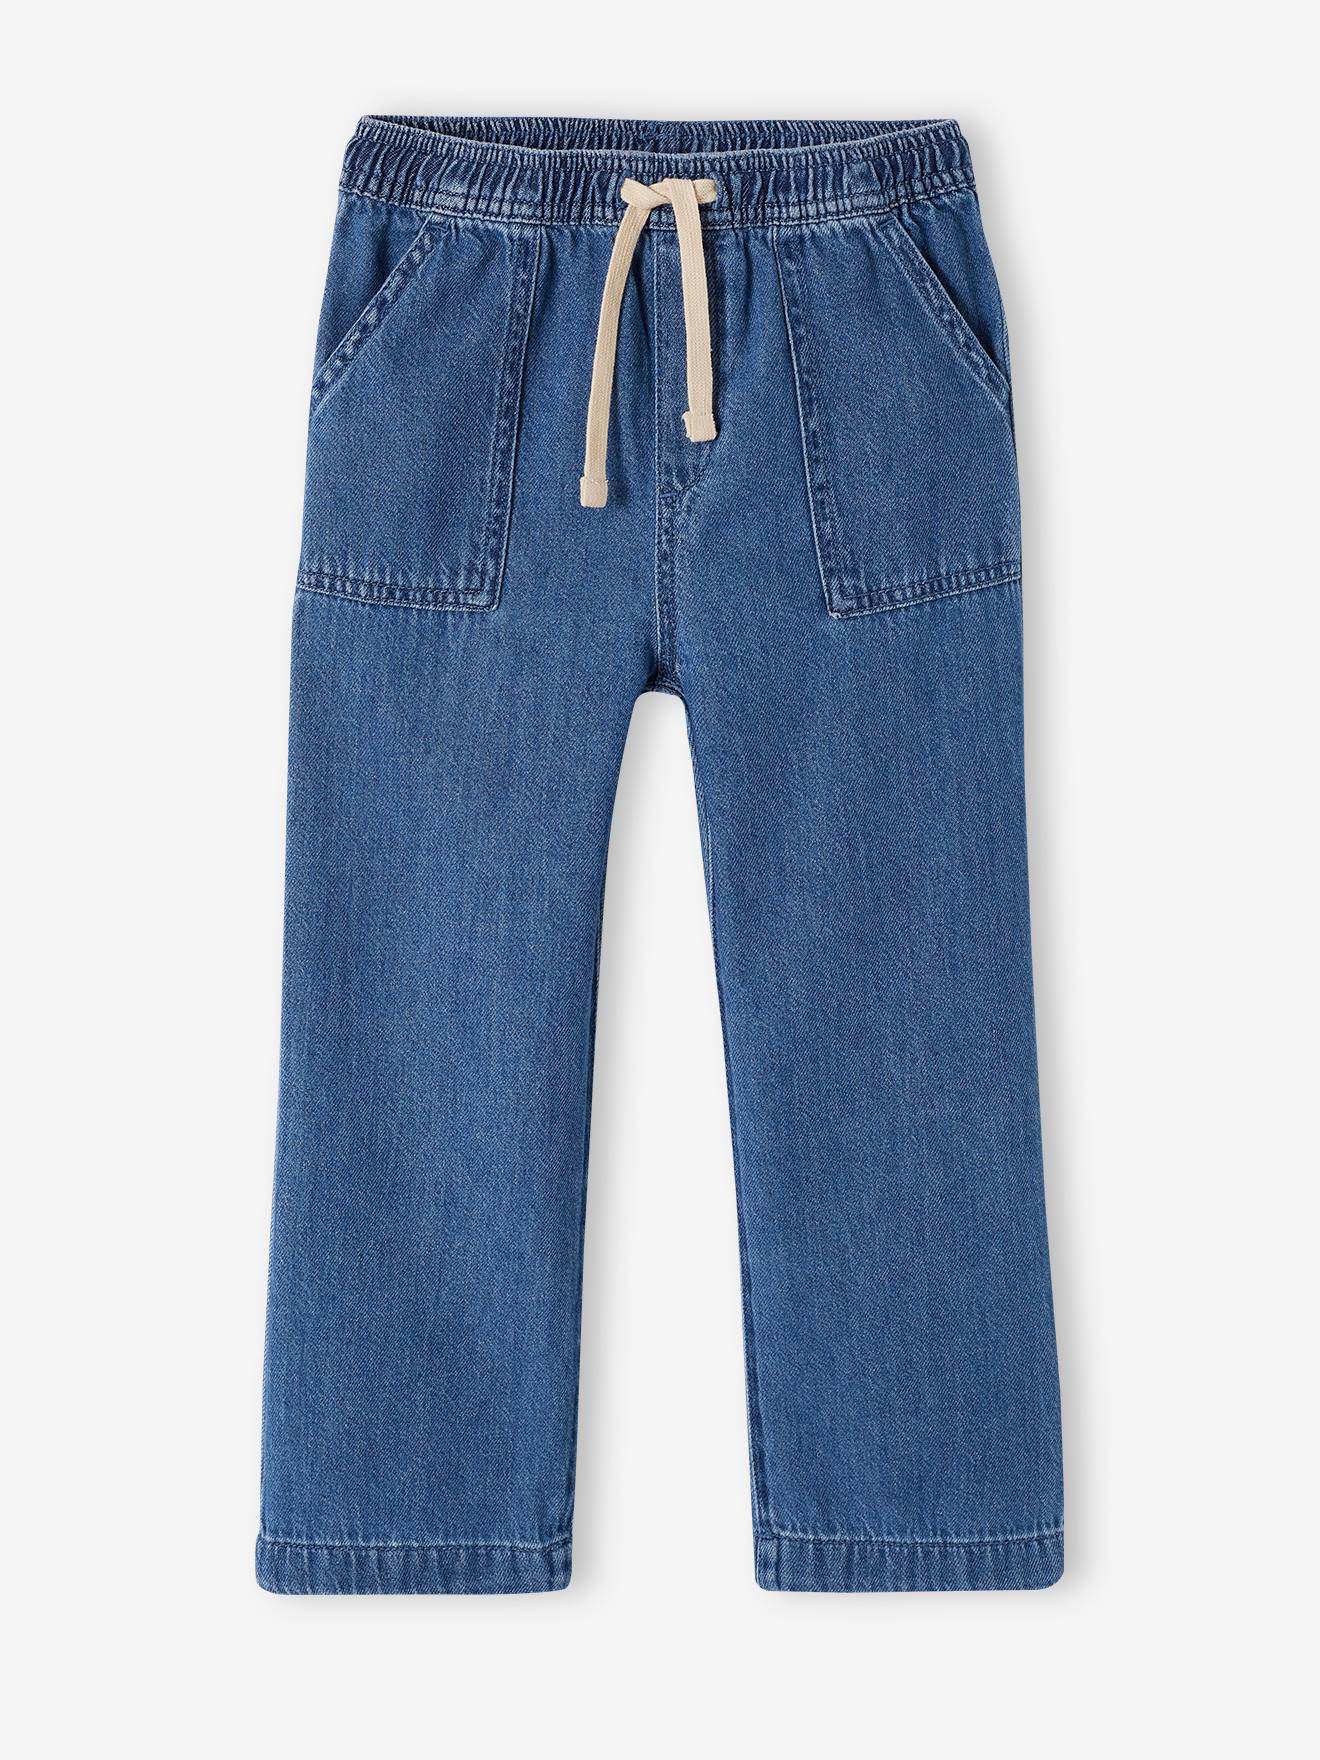 Loose-Fitting Straight Leg Jeans for Girls, Easy to Put On stone